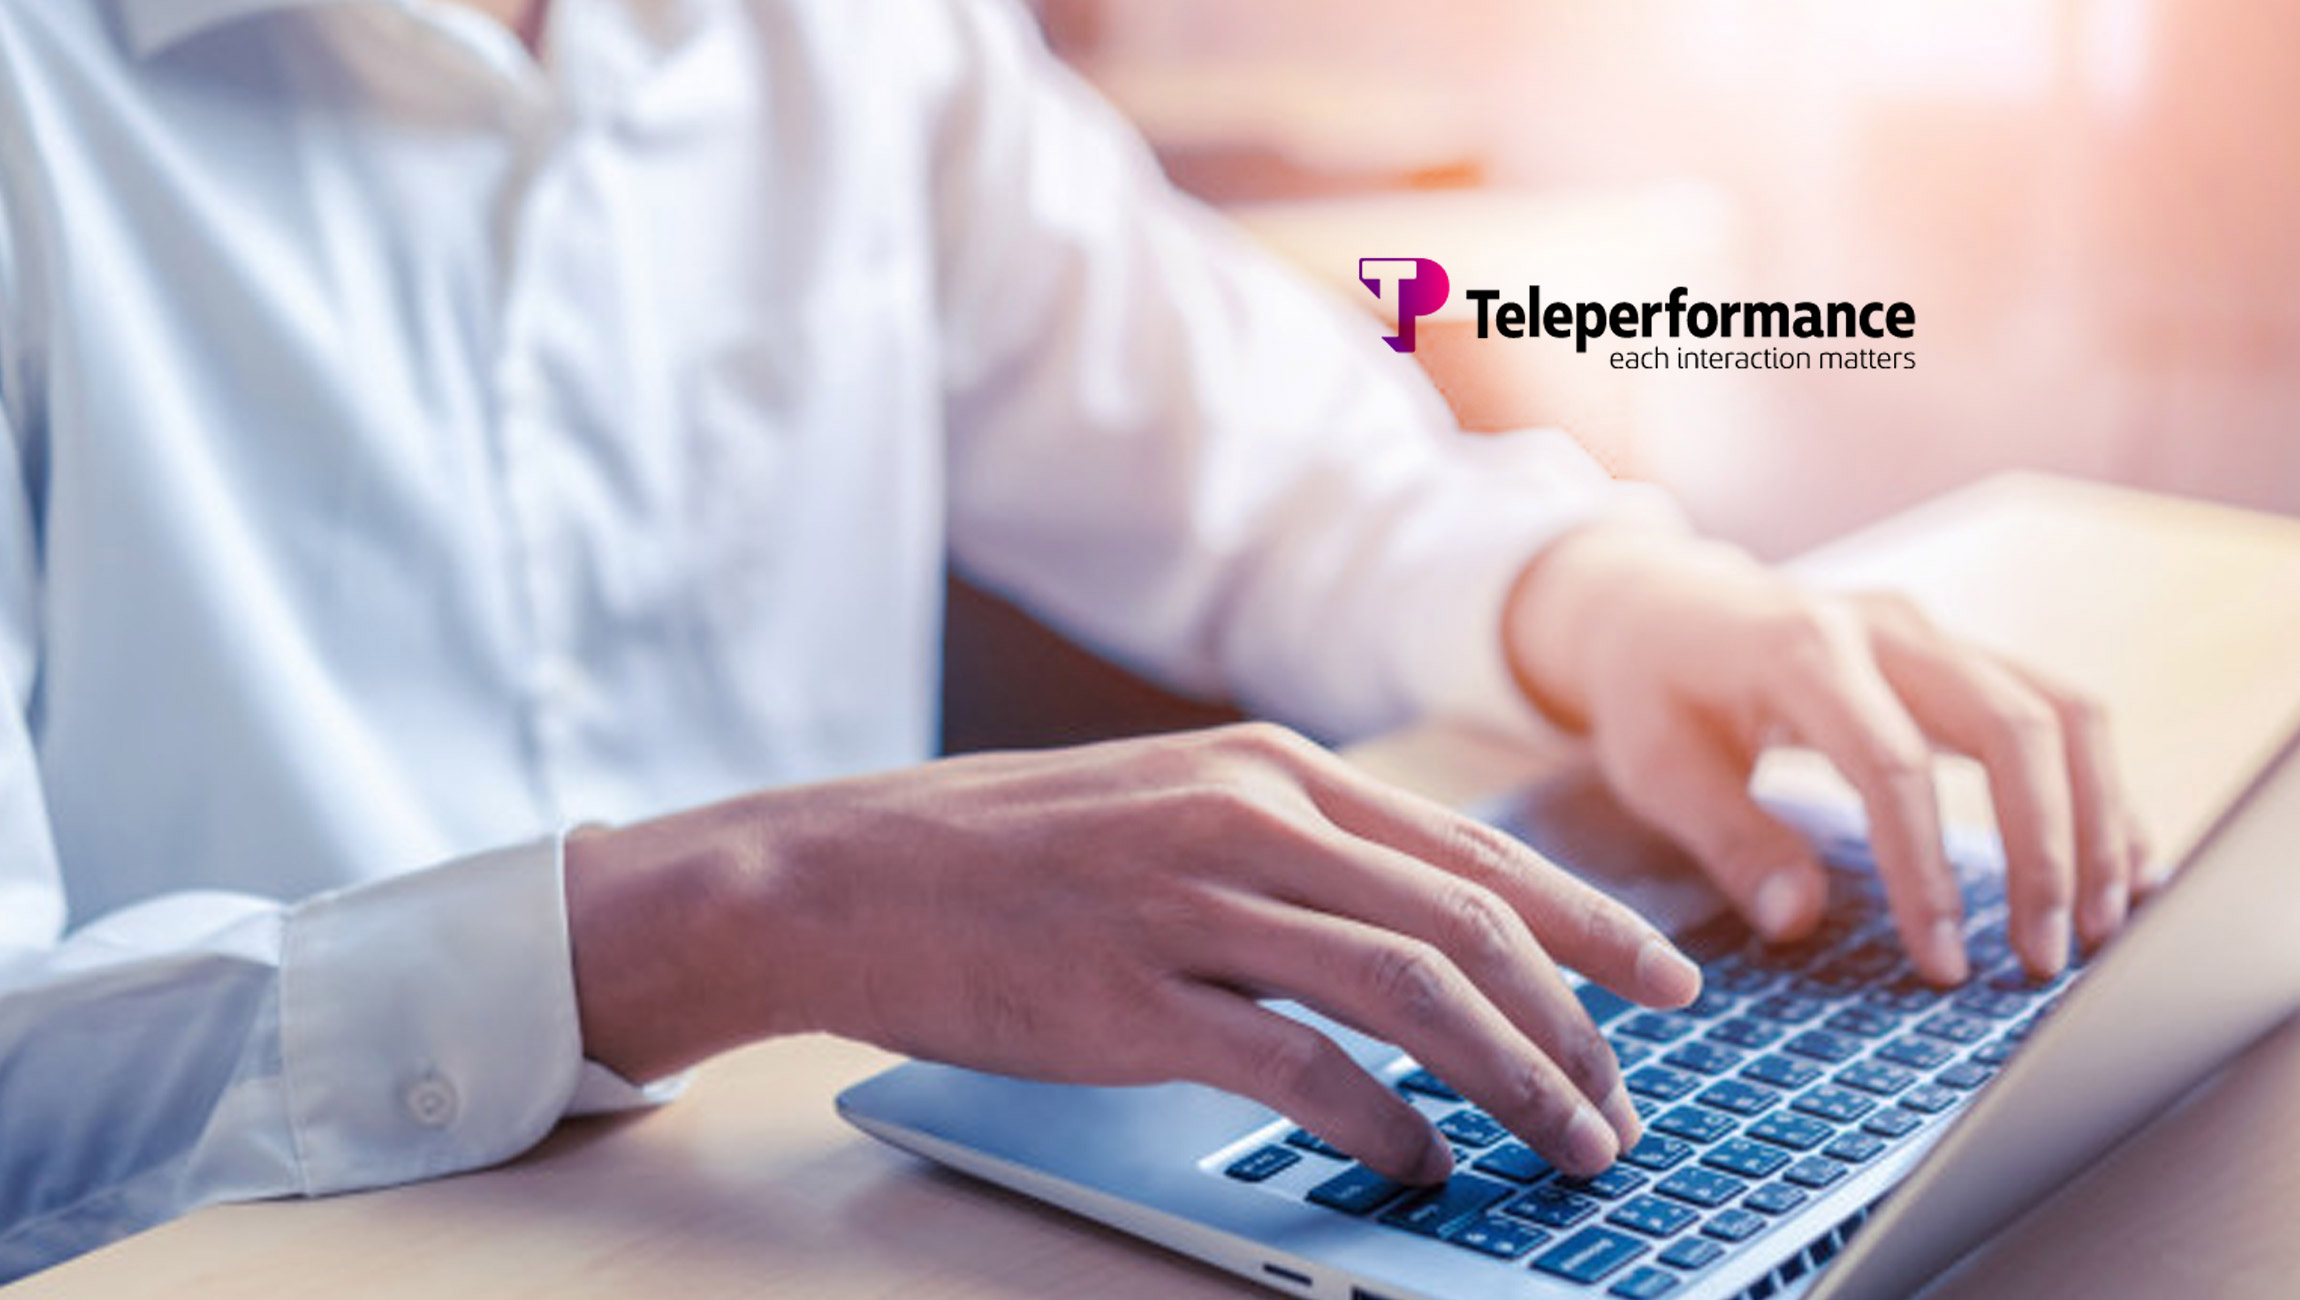 Teleperformance Named One of the 10 Most Responsible Companies in France by Le Point Magazine and Statista